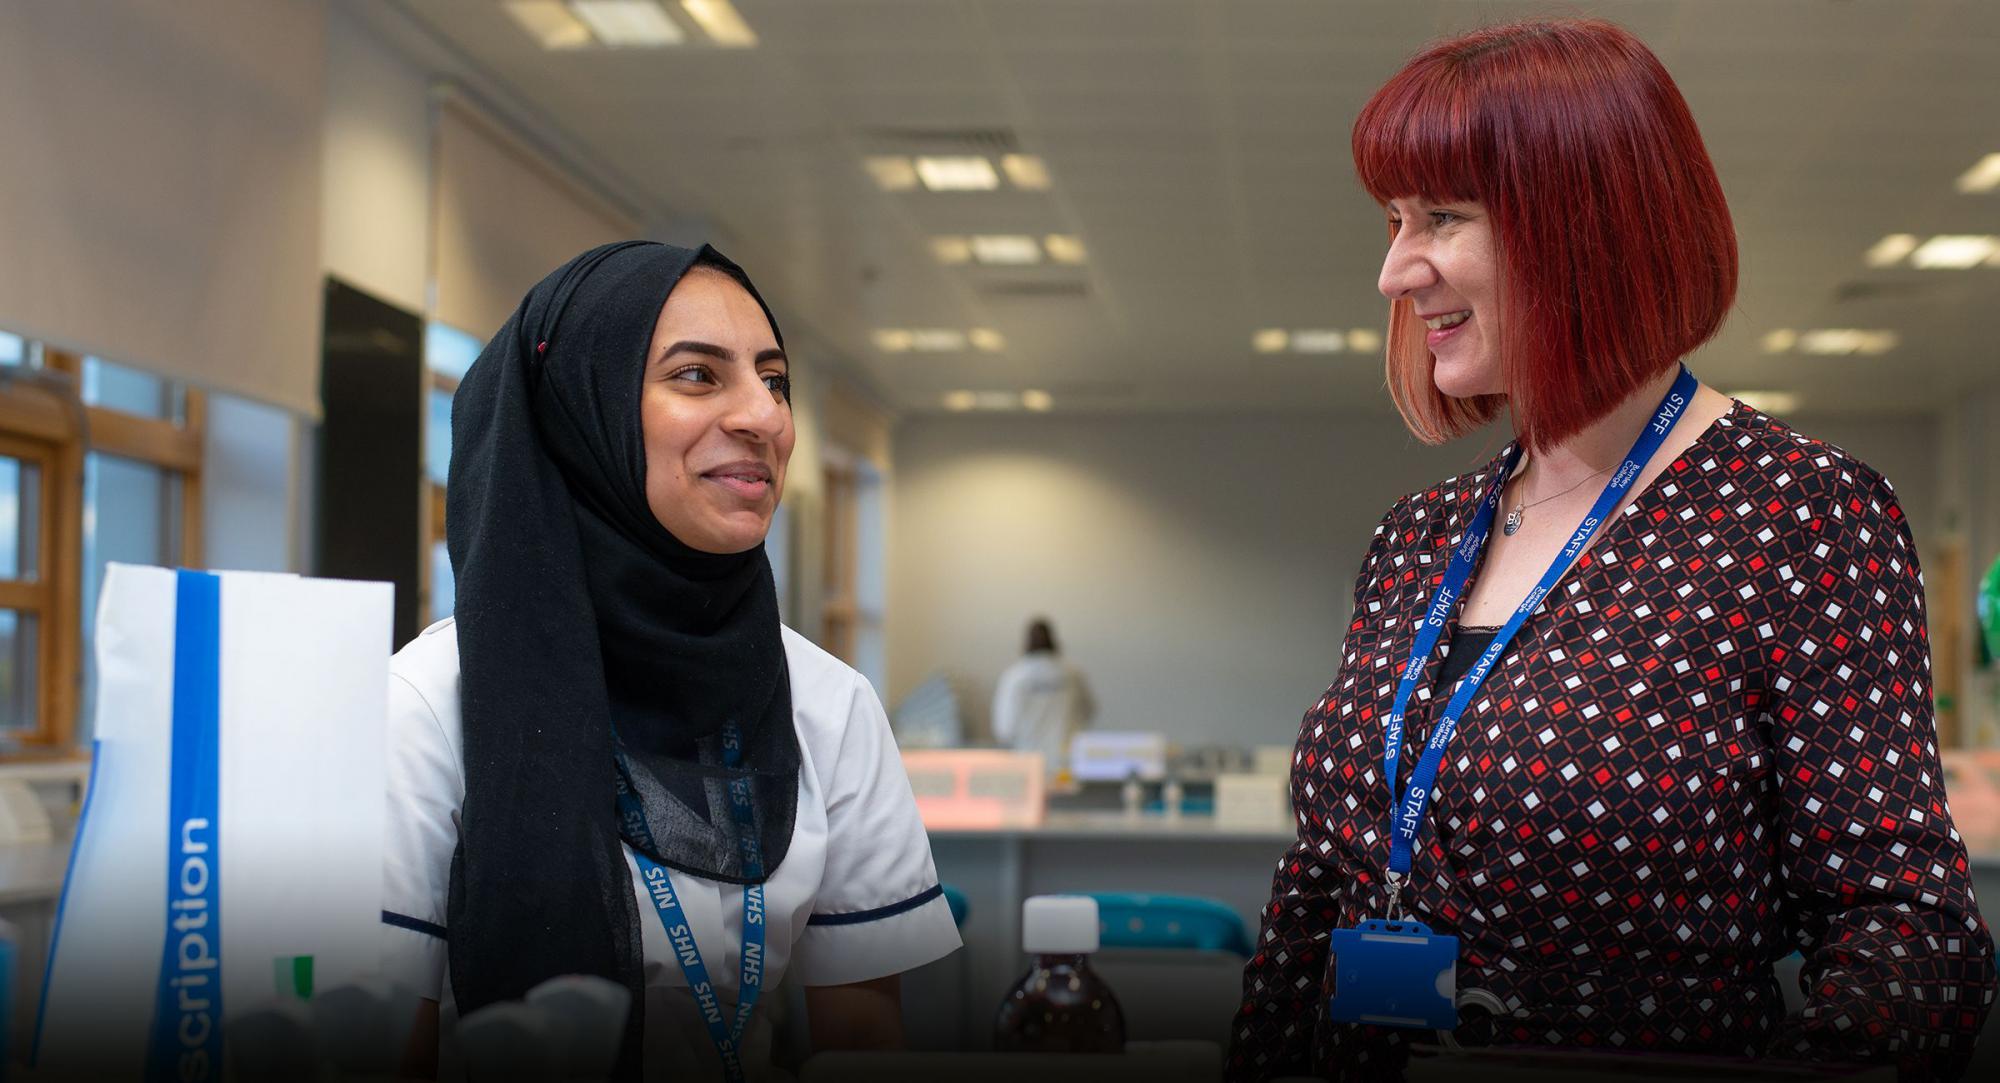 Amina Zaheer, Themis Apprentice, with friendly expert Trainer Assessor in state-of-the-art Burnley College lab